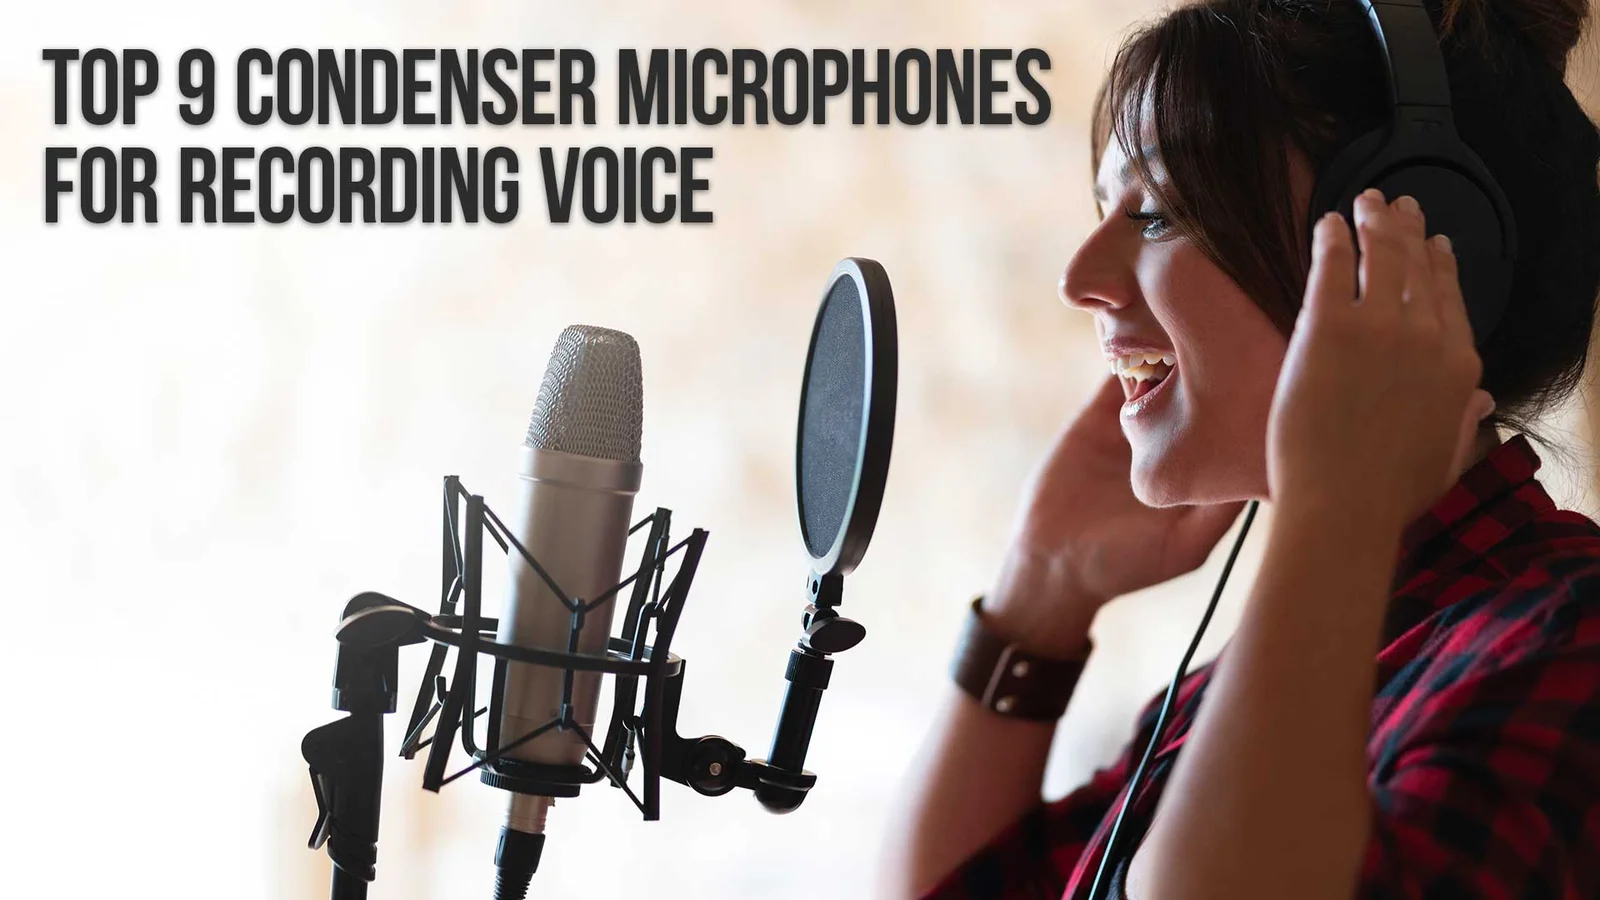 Top 9 Condenser Microphones for Recording Voice and Vocals